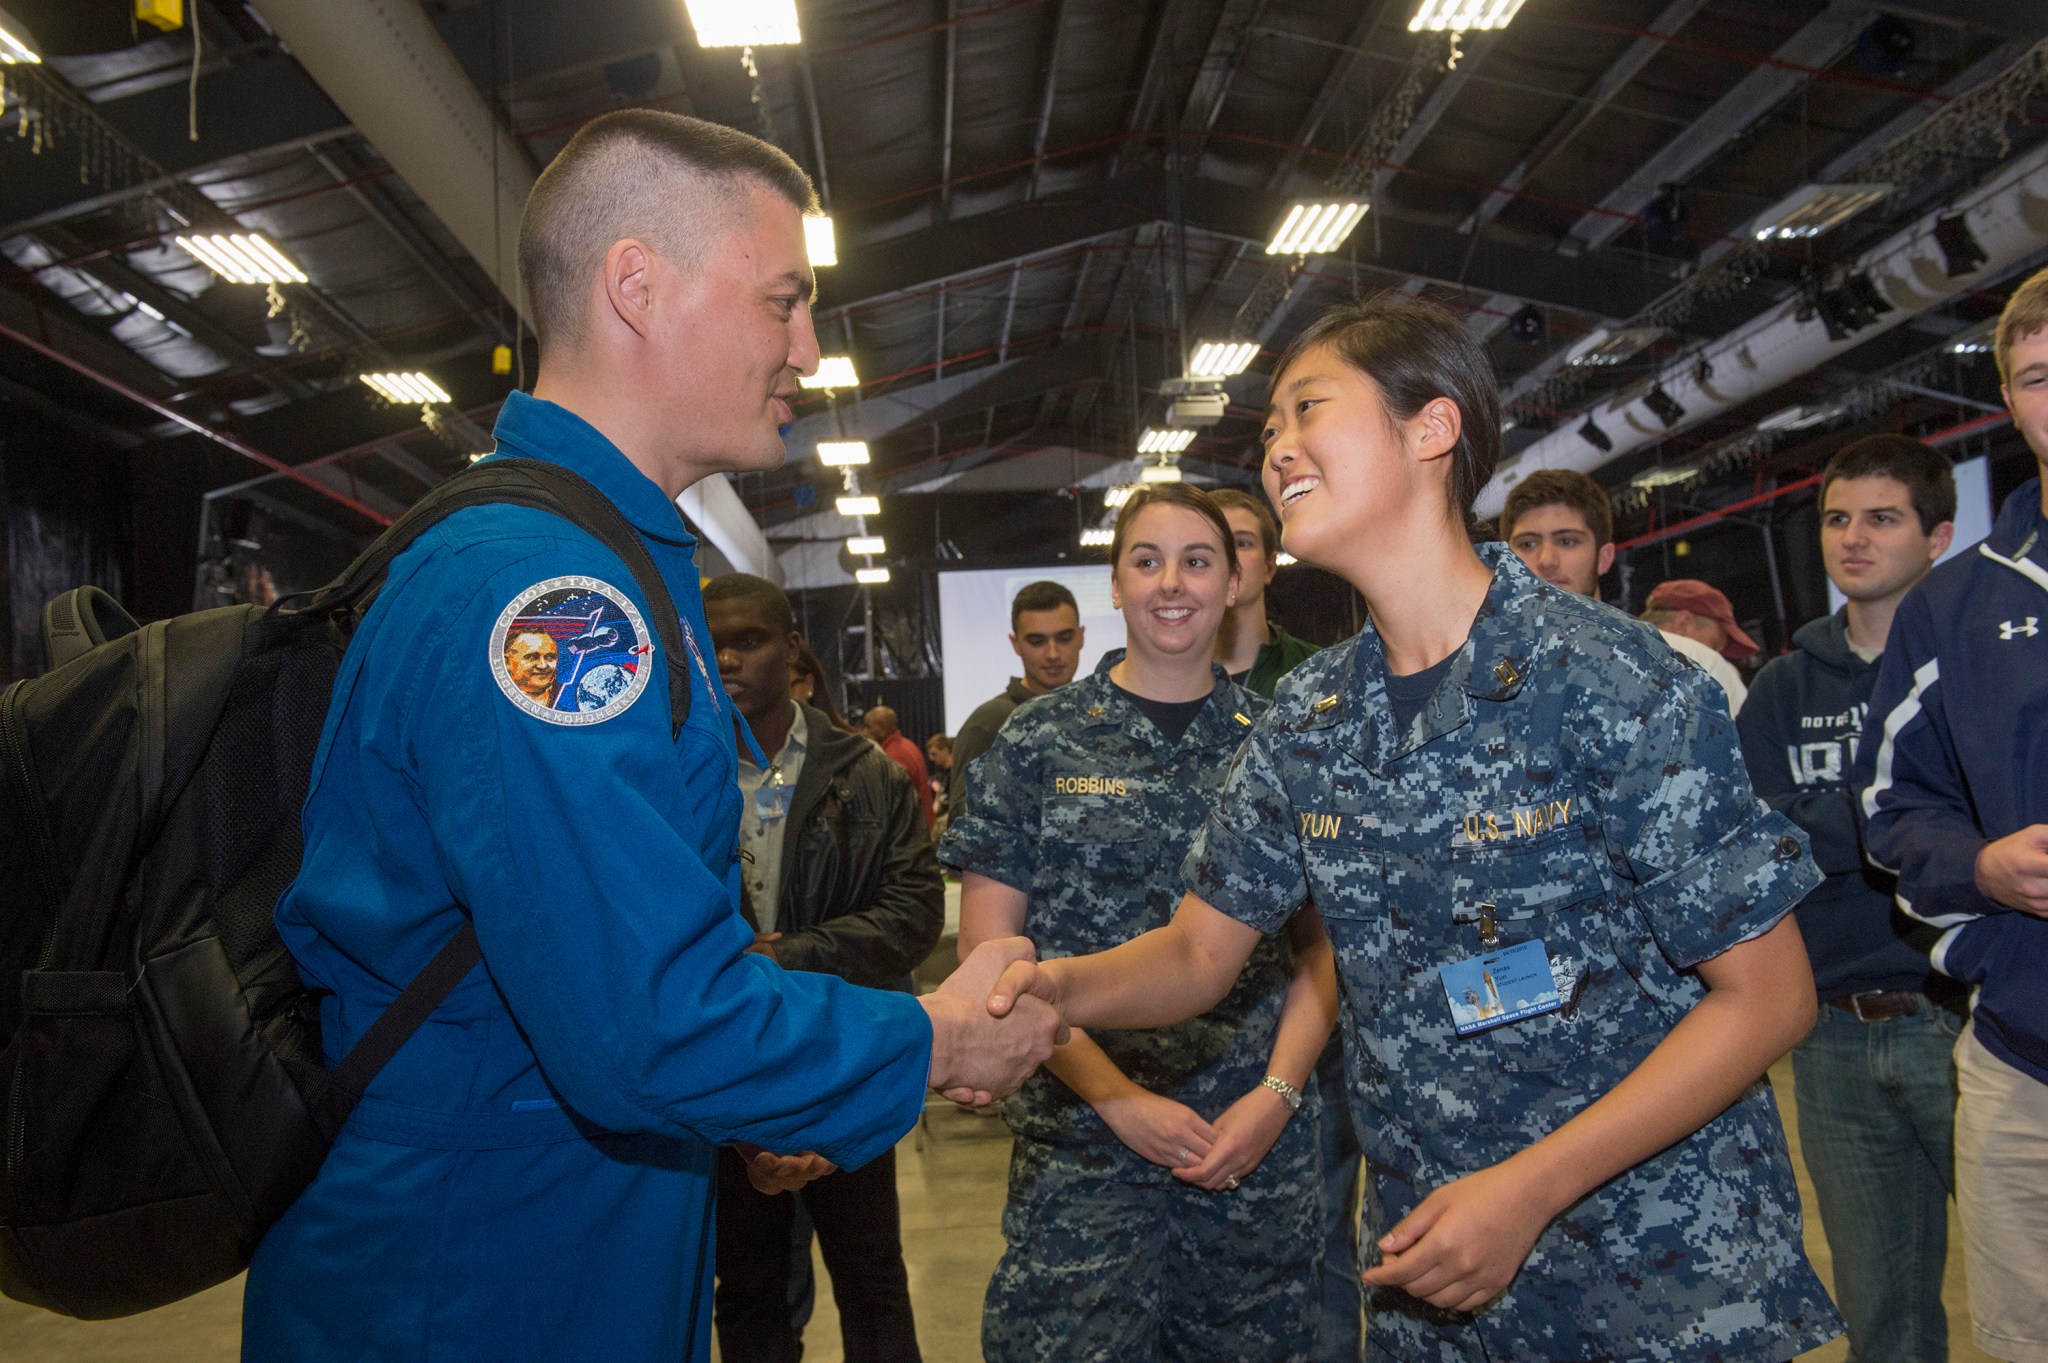 During his visit, Lindgren speaks with students who were at Marshall for NASA Student Launch, including Midshipman Zenas Yun.